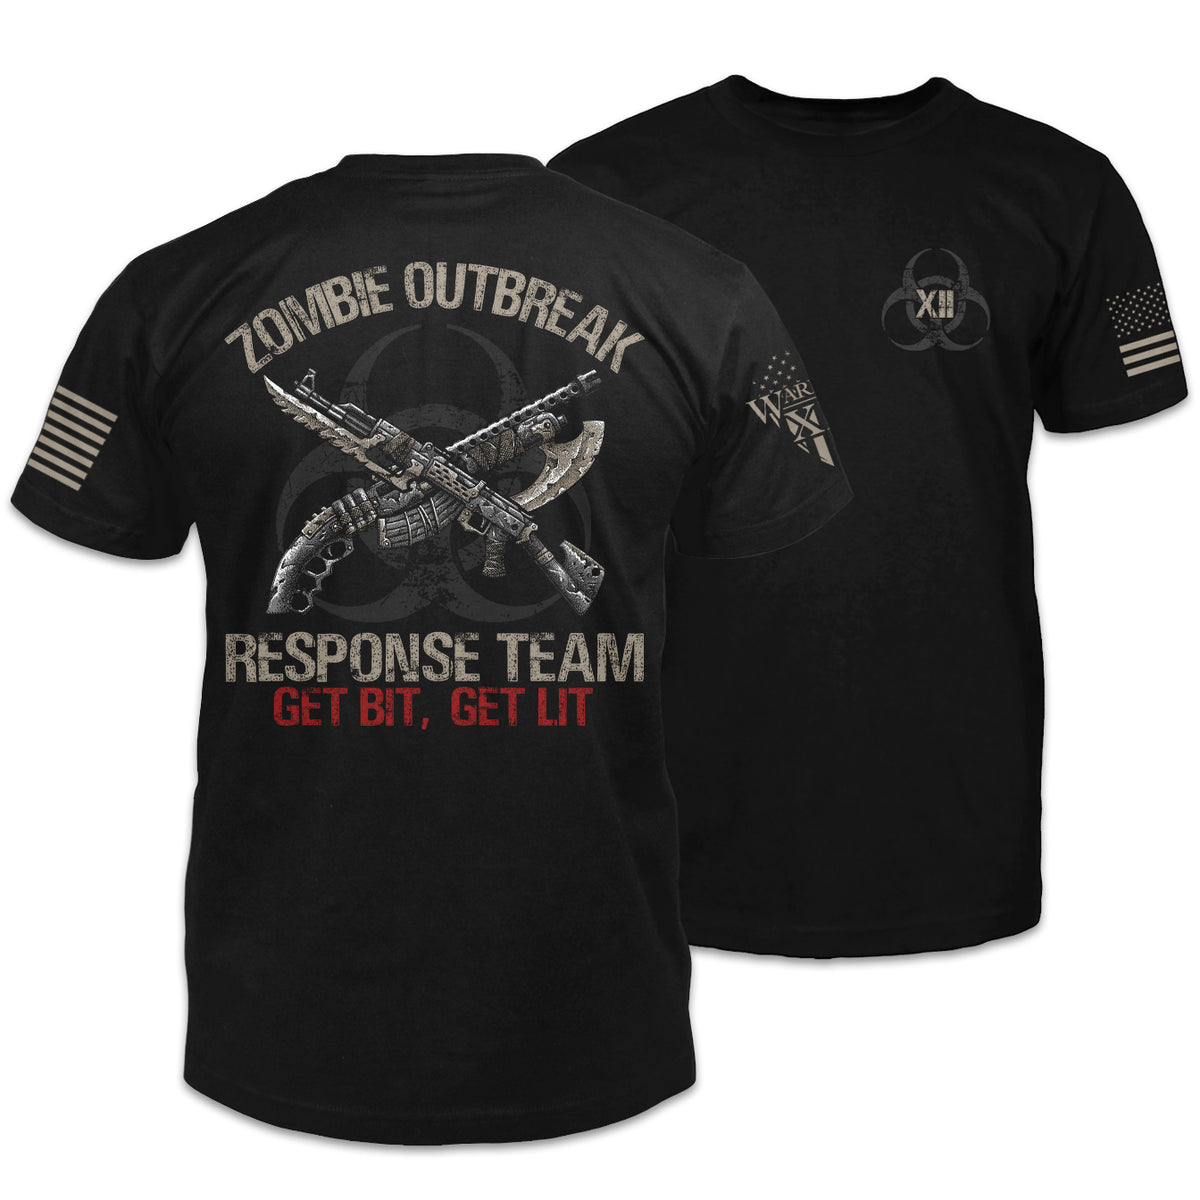 Front and back black t-shirt with the words "Zombie Outbreak Response Team - Get Bit, Get Lit" and two guns with knives printed on the shirt.